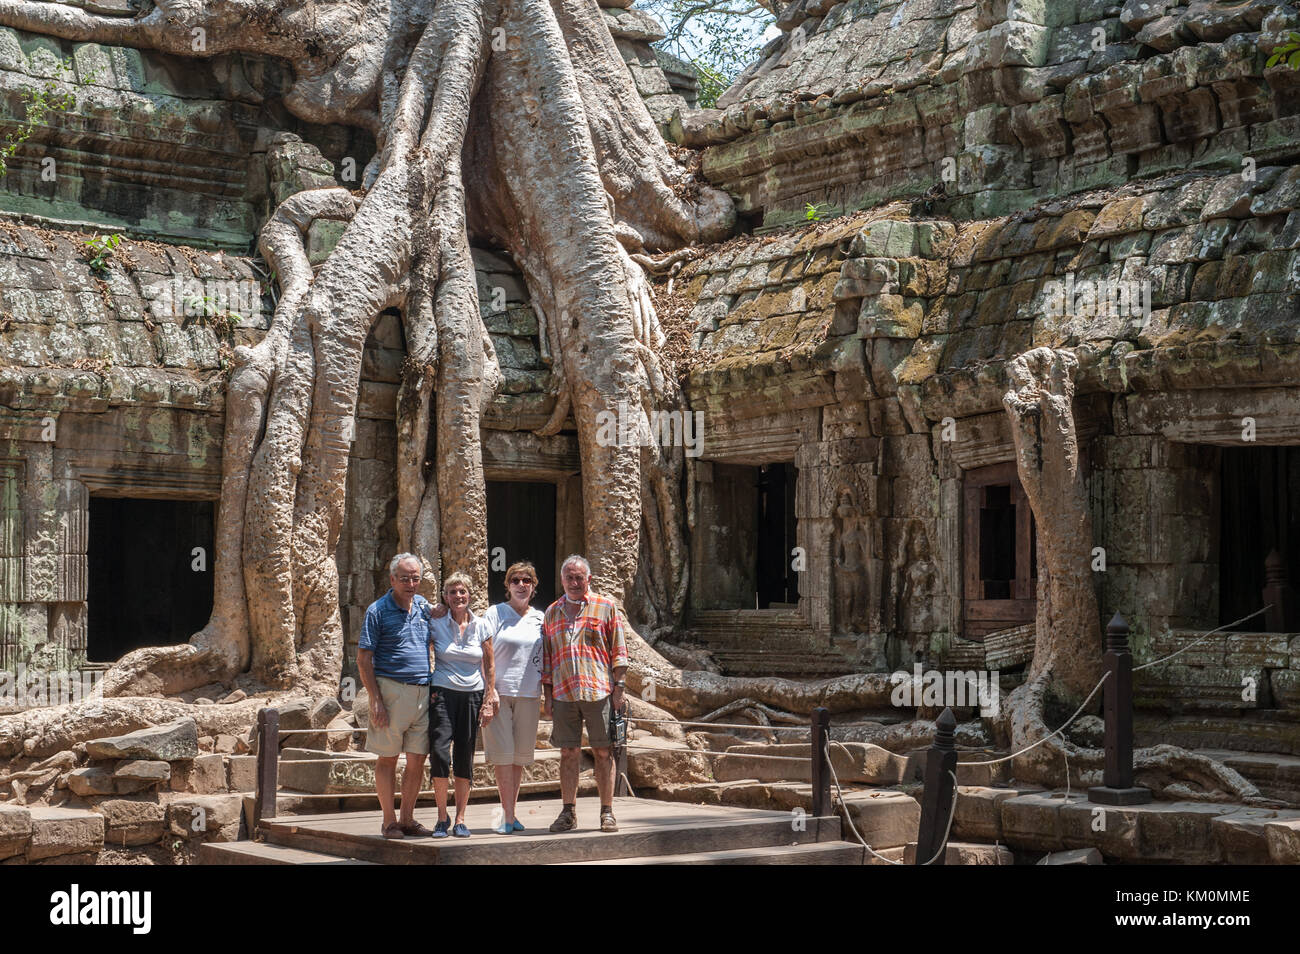 Tourists posing at Ta Prohm in Siem Reap. Built in 12-13th century Ta Prohm temple was later the location for the movie Tomb Raider. Stock Photo